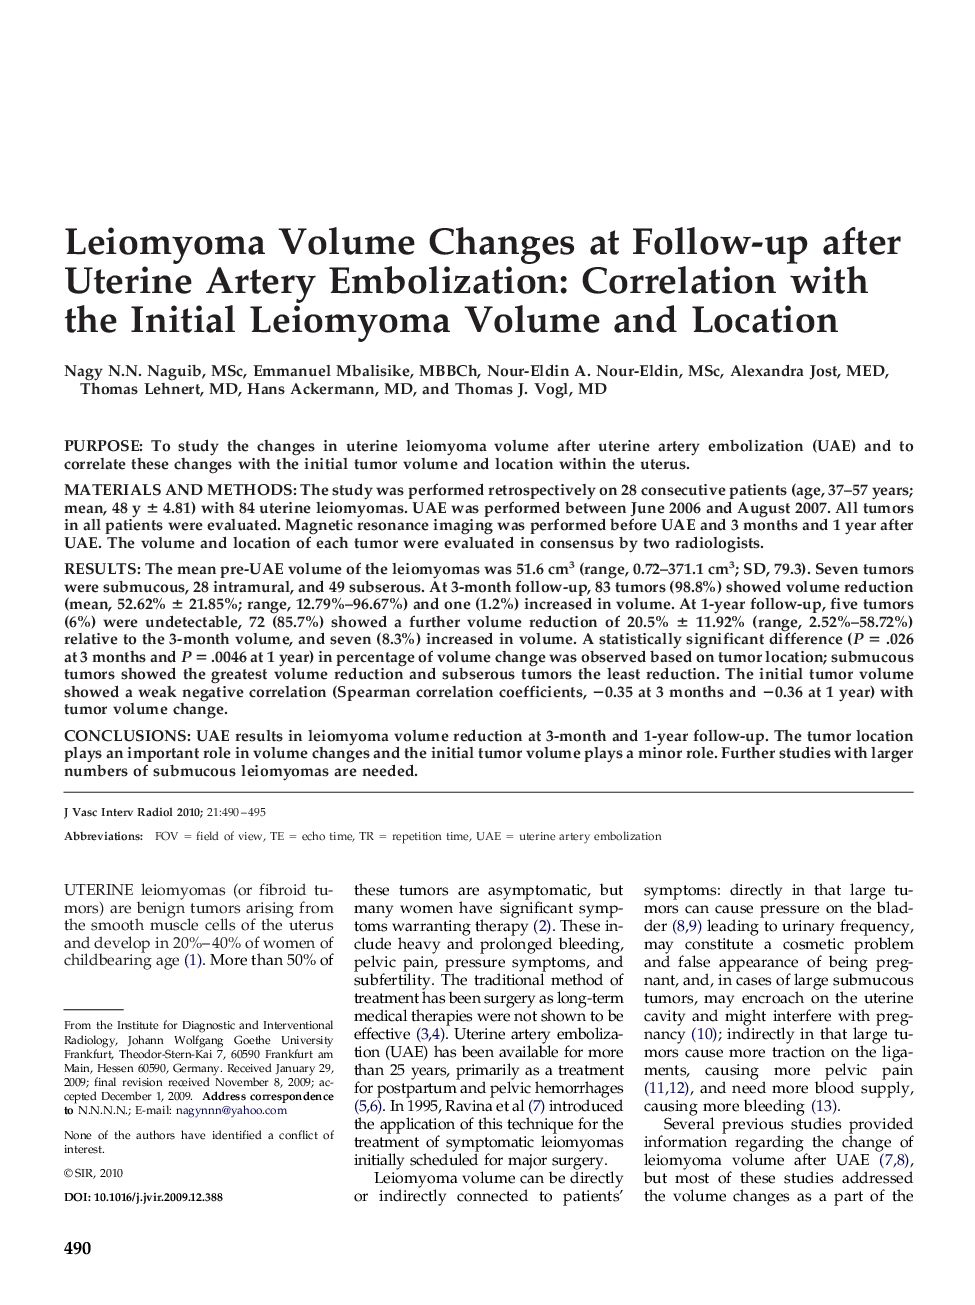 Leiomyoma Volume Changes at Follow-up after Uterine Artery Embolization: Correlation with the Initial Leiomyoma Volume and Location